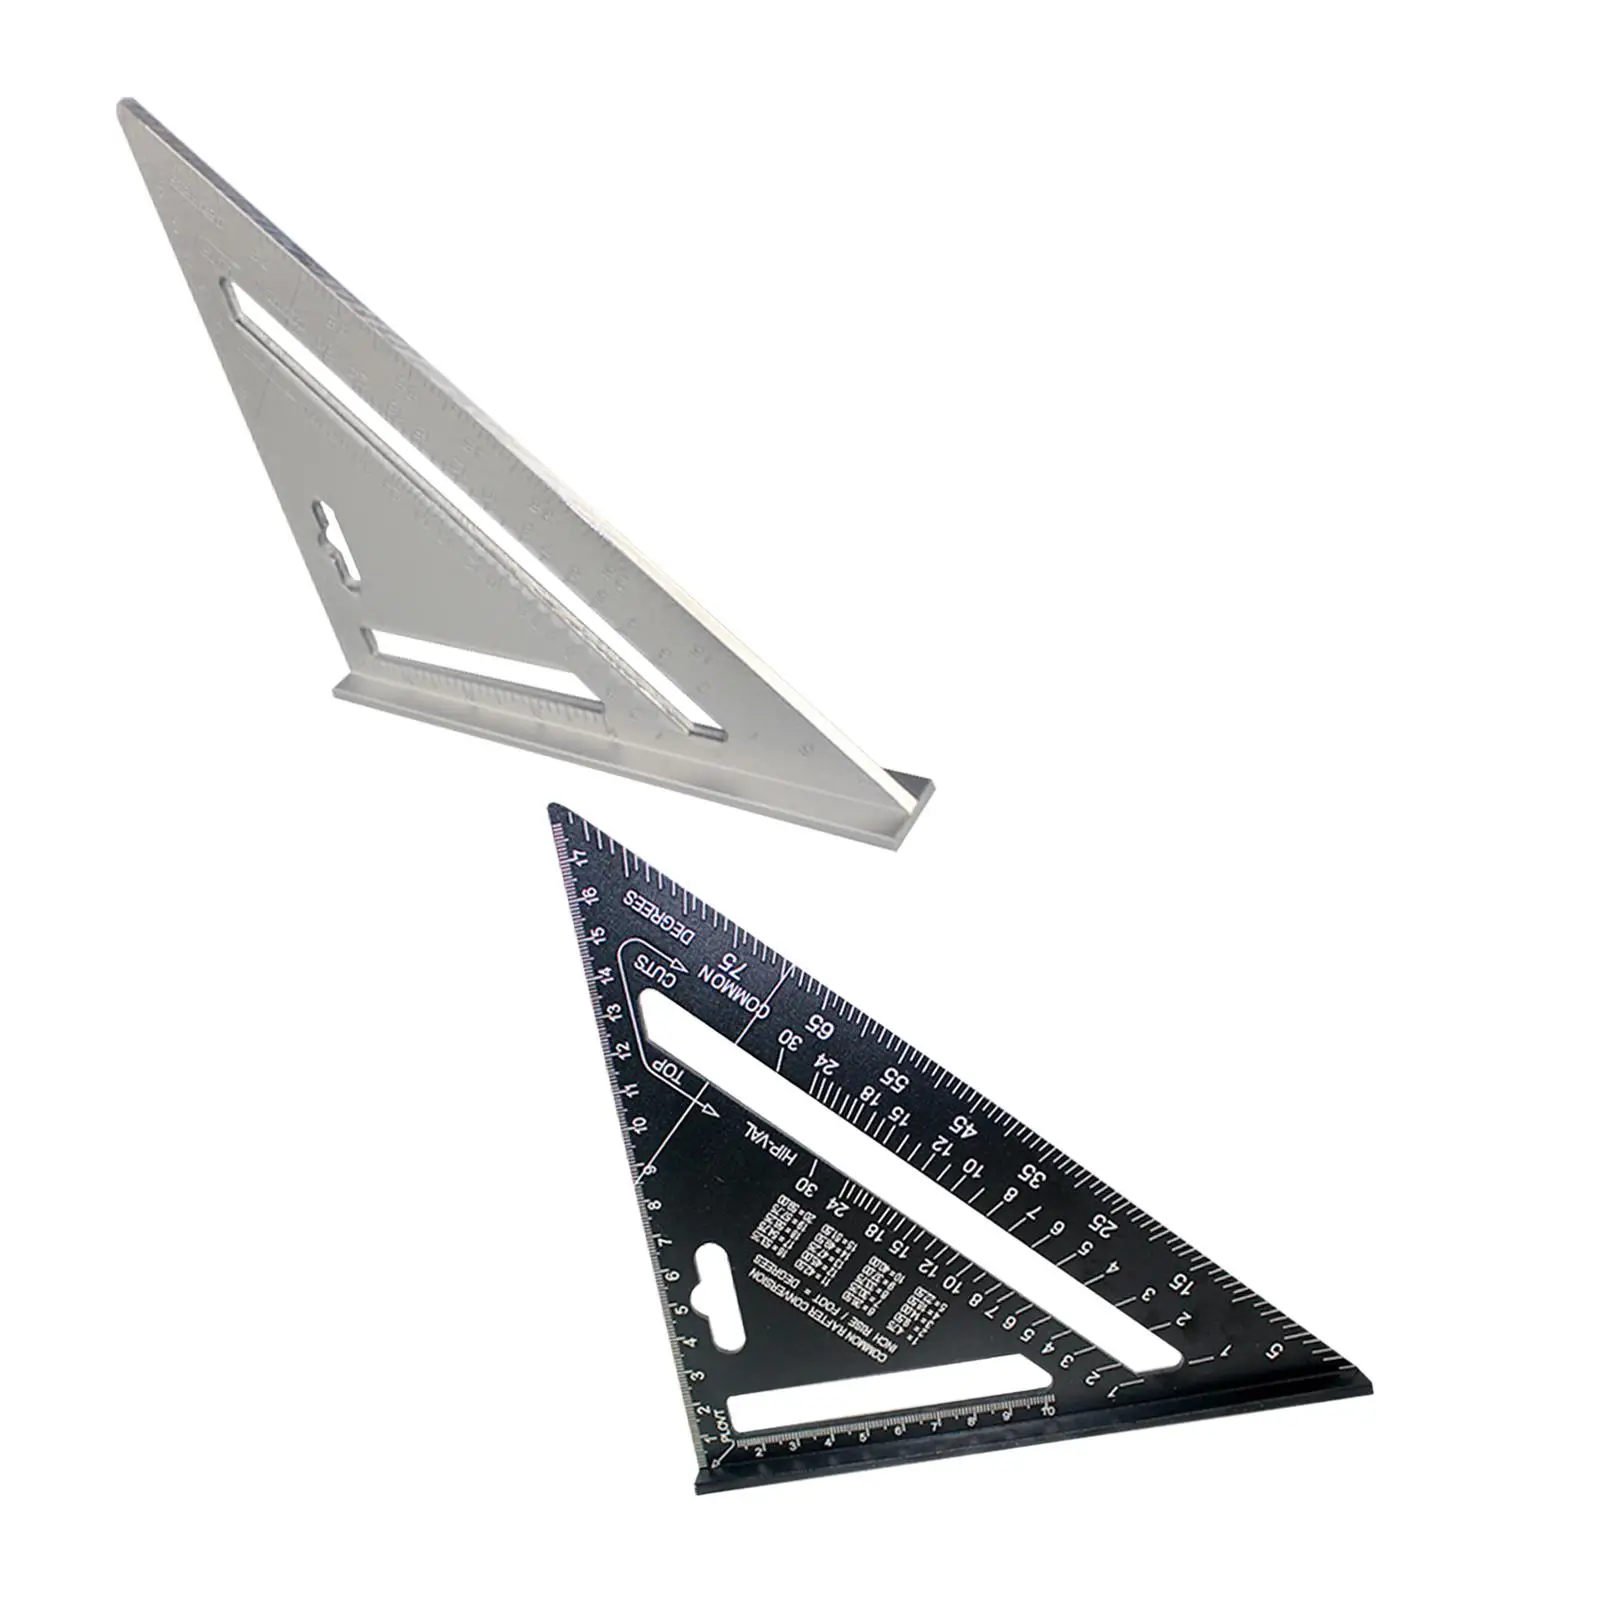 Aluminum Alloy Metric Triangle Angle Ruler Squares for Woodworking Square Angle Protractor Measuring Tools